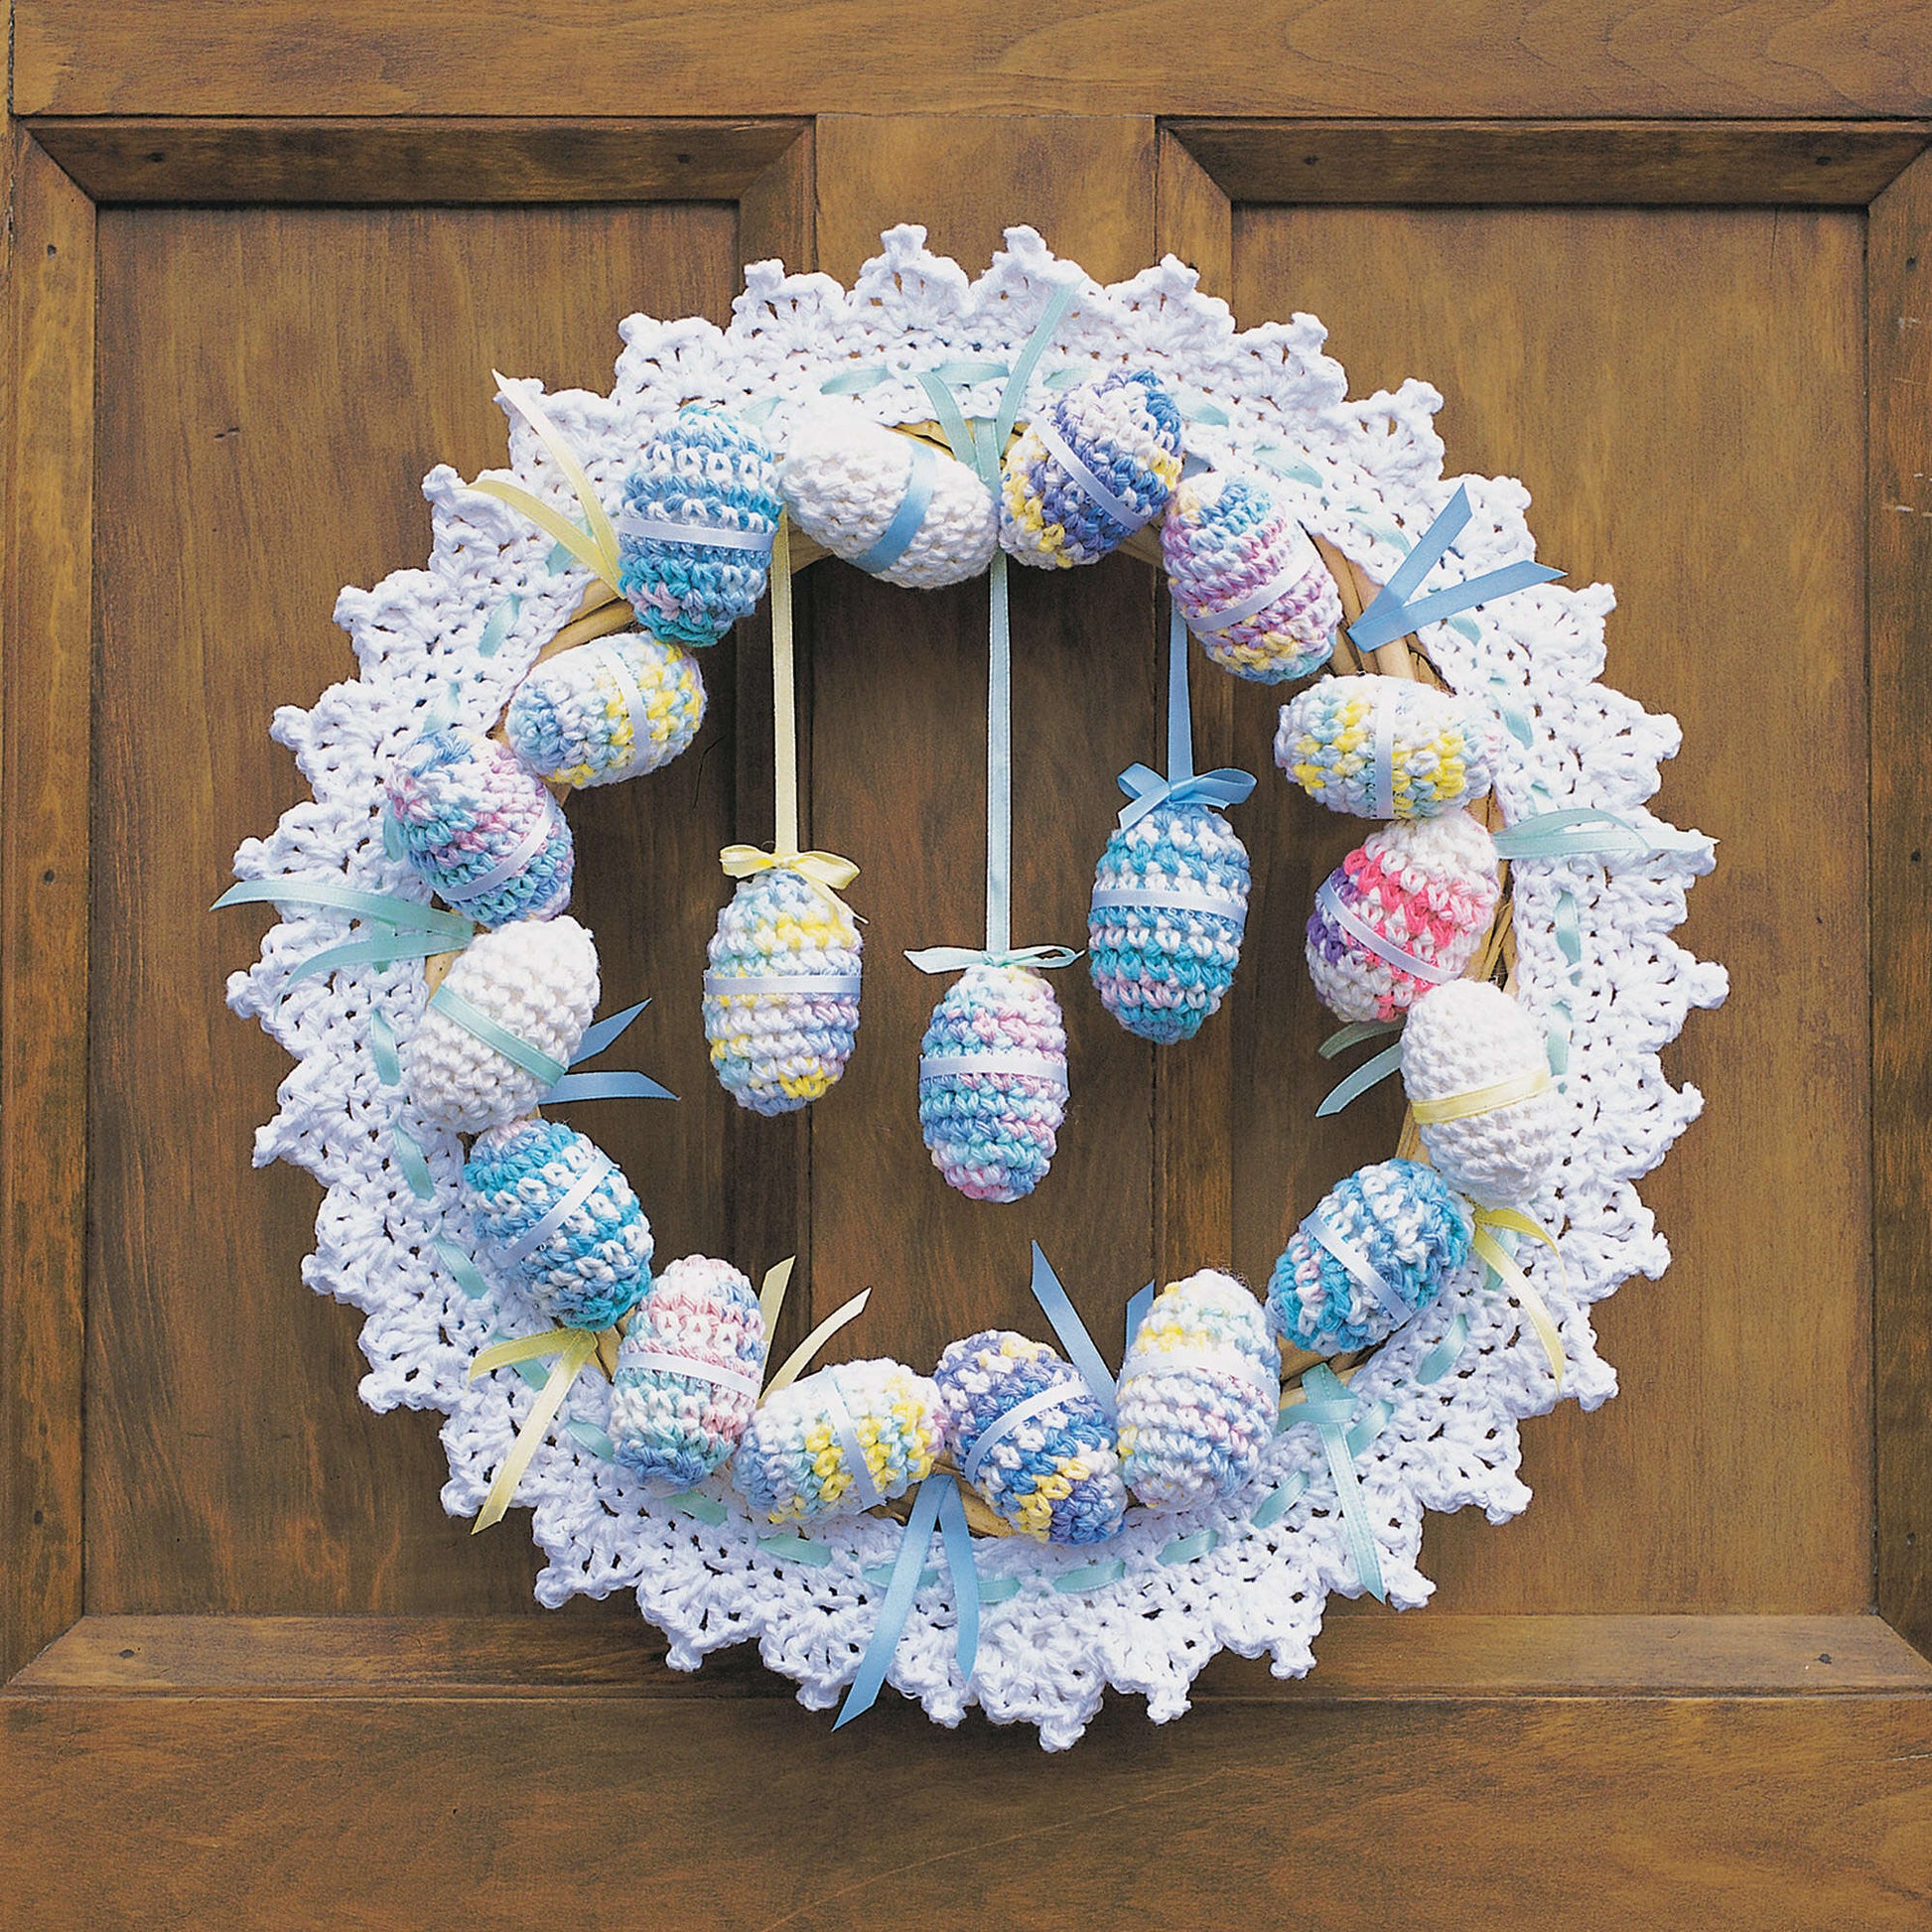 Happy Easter for wreath